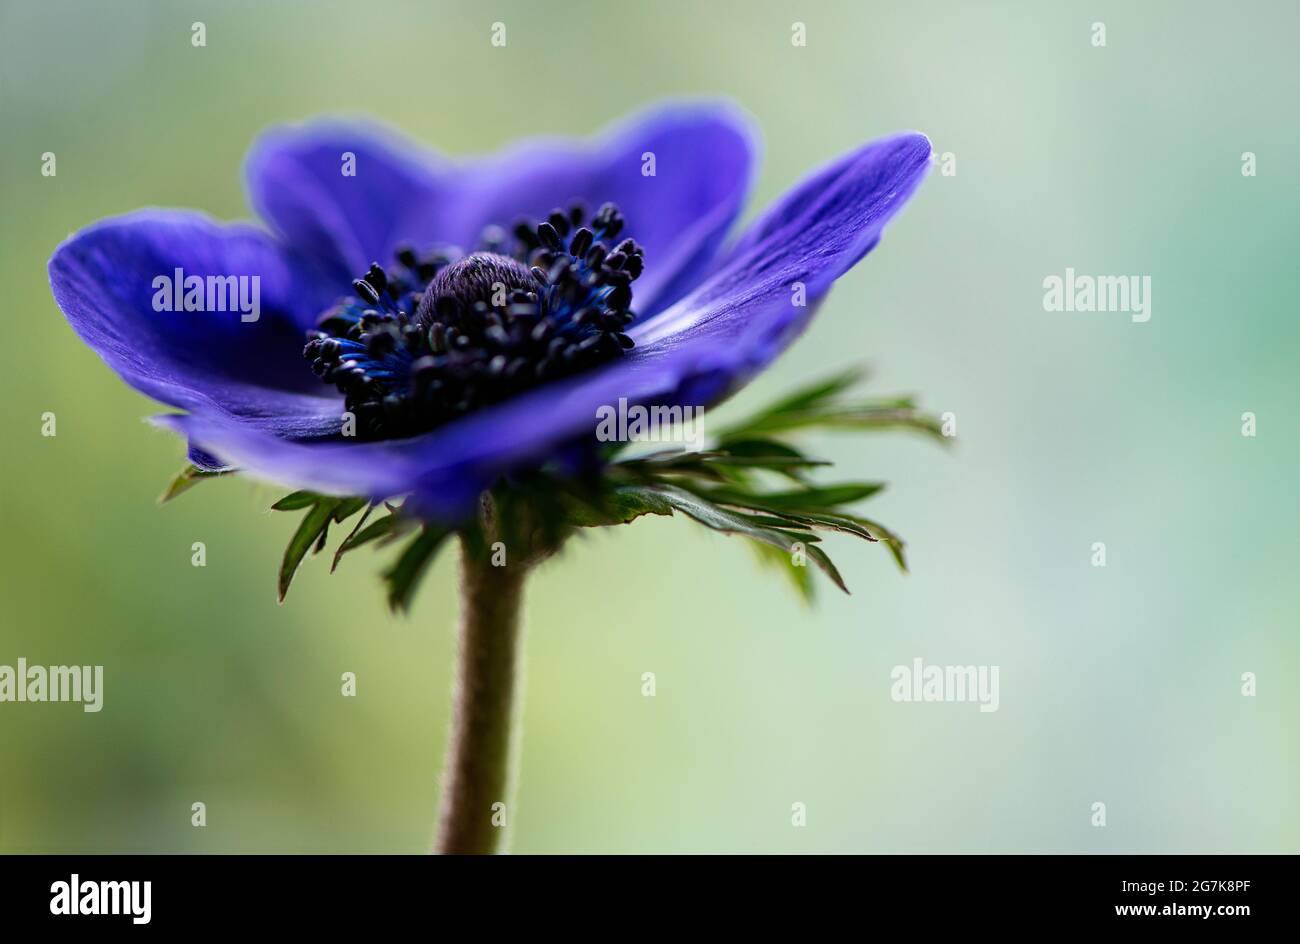 A close up of a blue anemone flower. Stock Photo